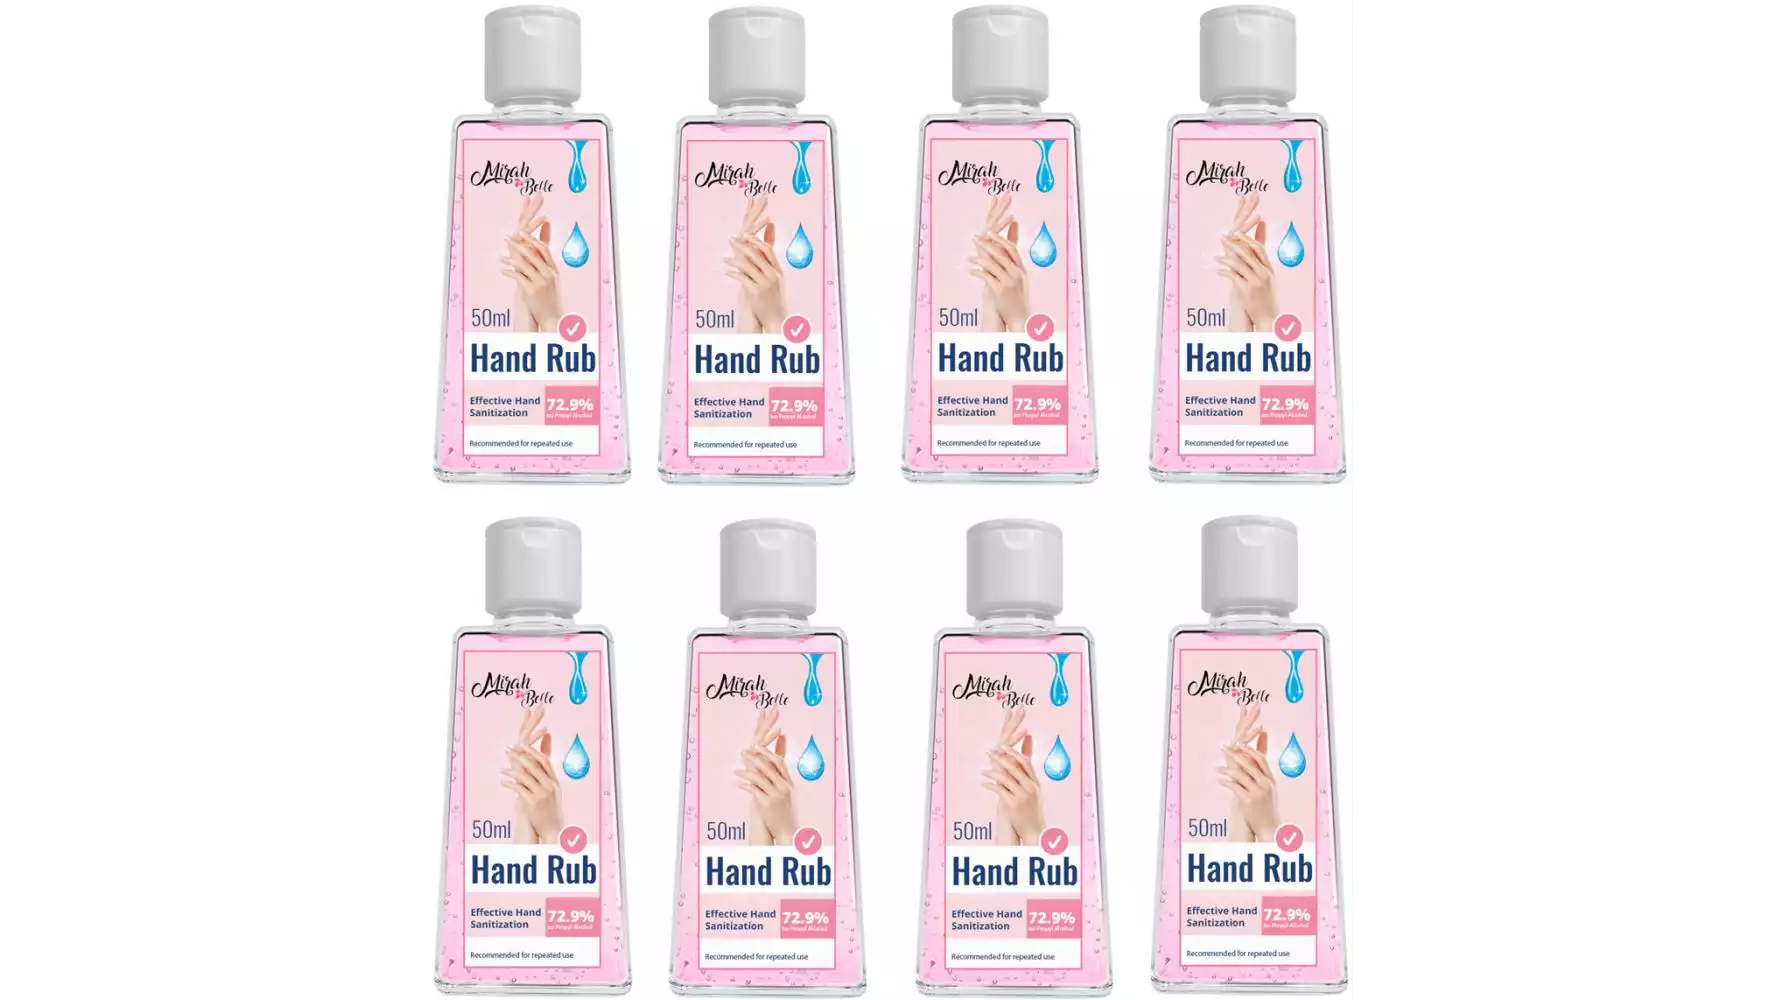 Mirah Belle Organic And Natural Hand Sanitizer (50ml, Pack of 8)